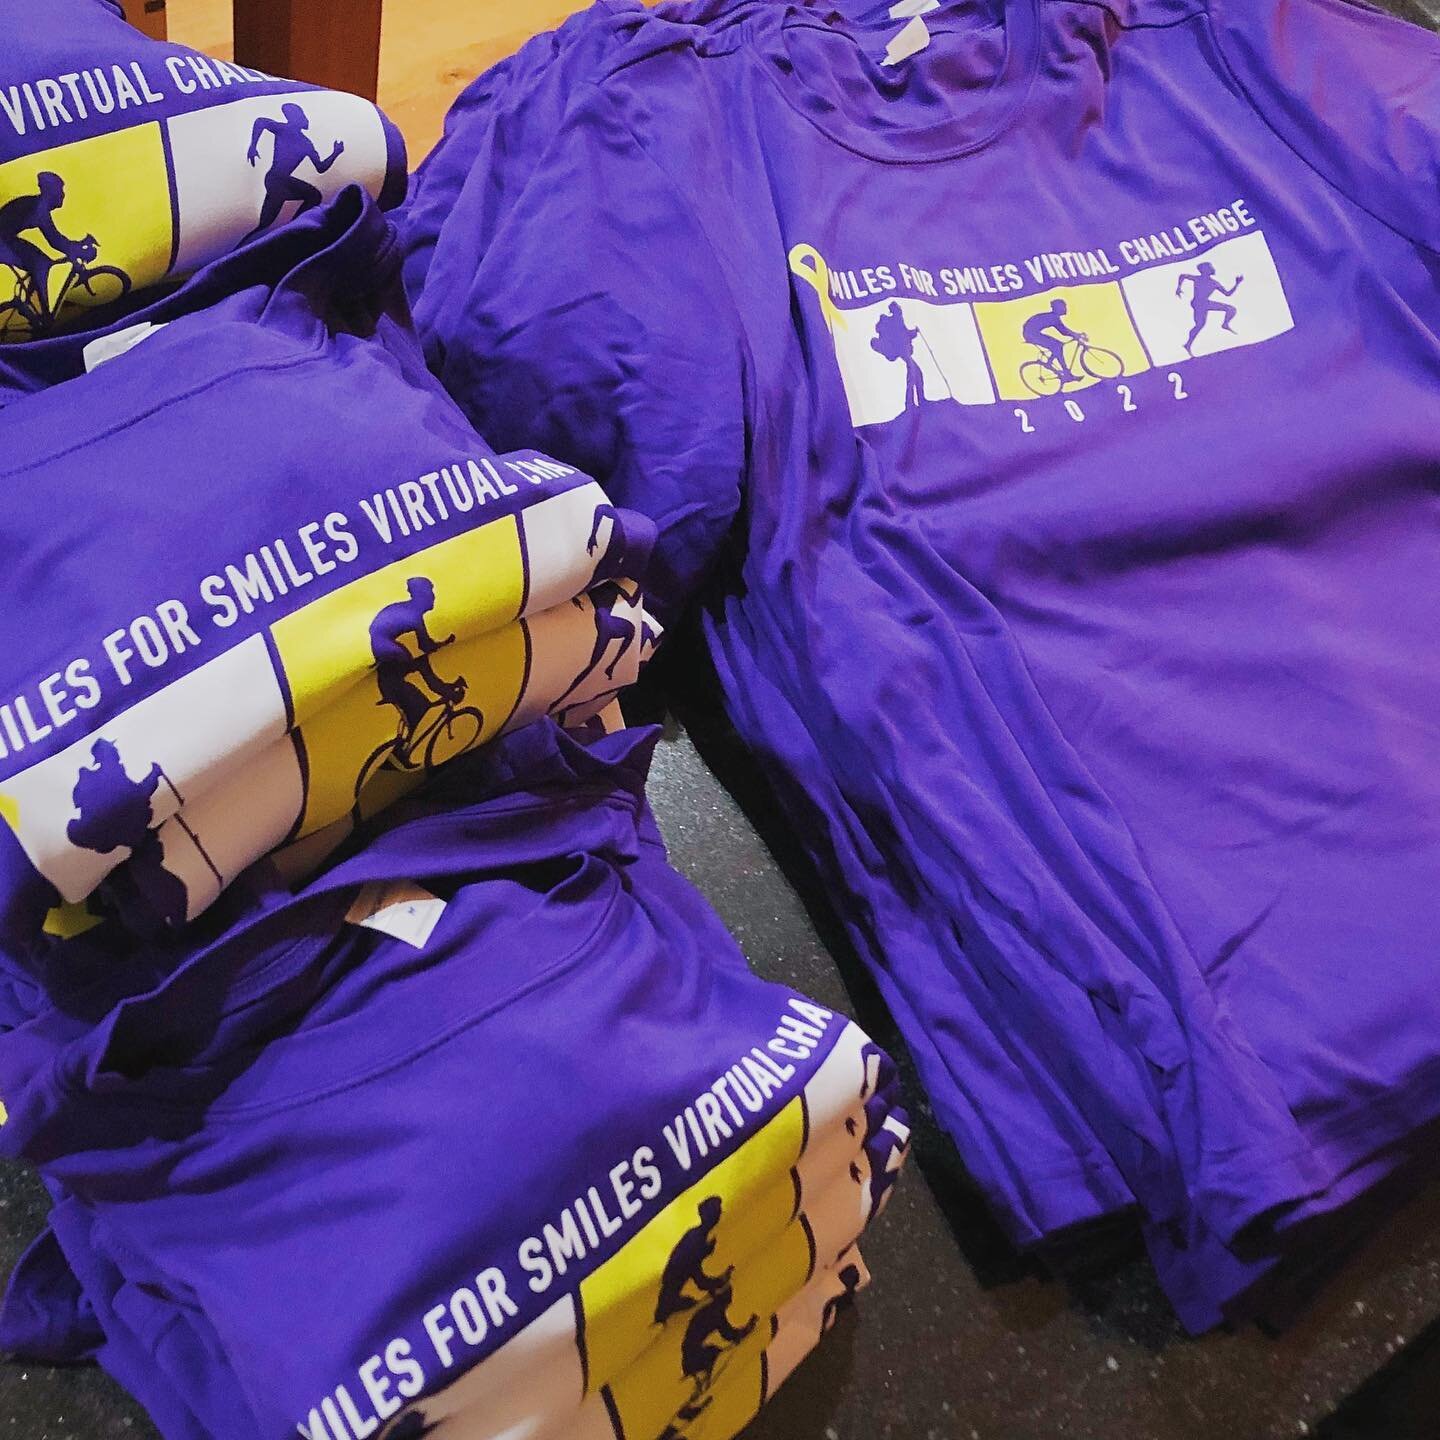 We are 20 days away from the Miles For Smiles Virtual Challenge!!! Shirts are in and headed your way💌 keep an eye out for a little purple package over the next couple of weeks!

Late registration is open in the link in our bio until 4/30💛💜 #keepsm